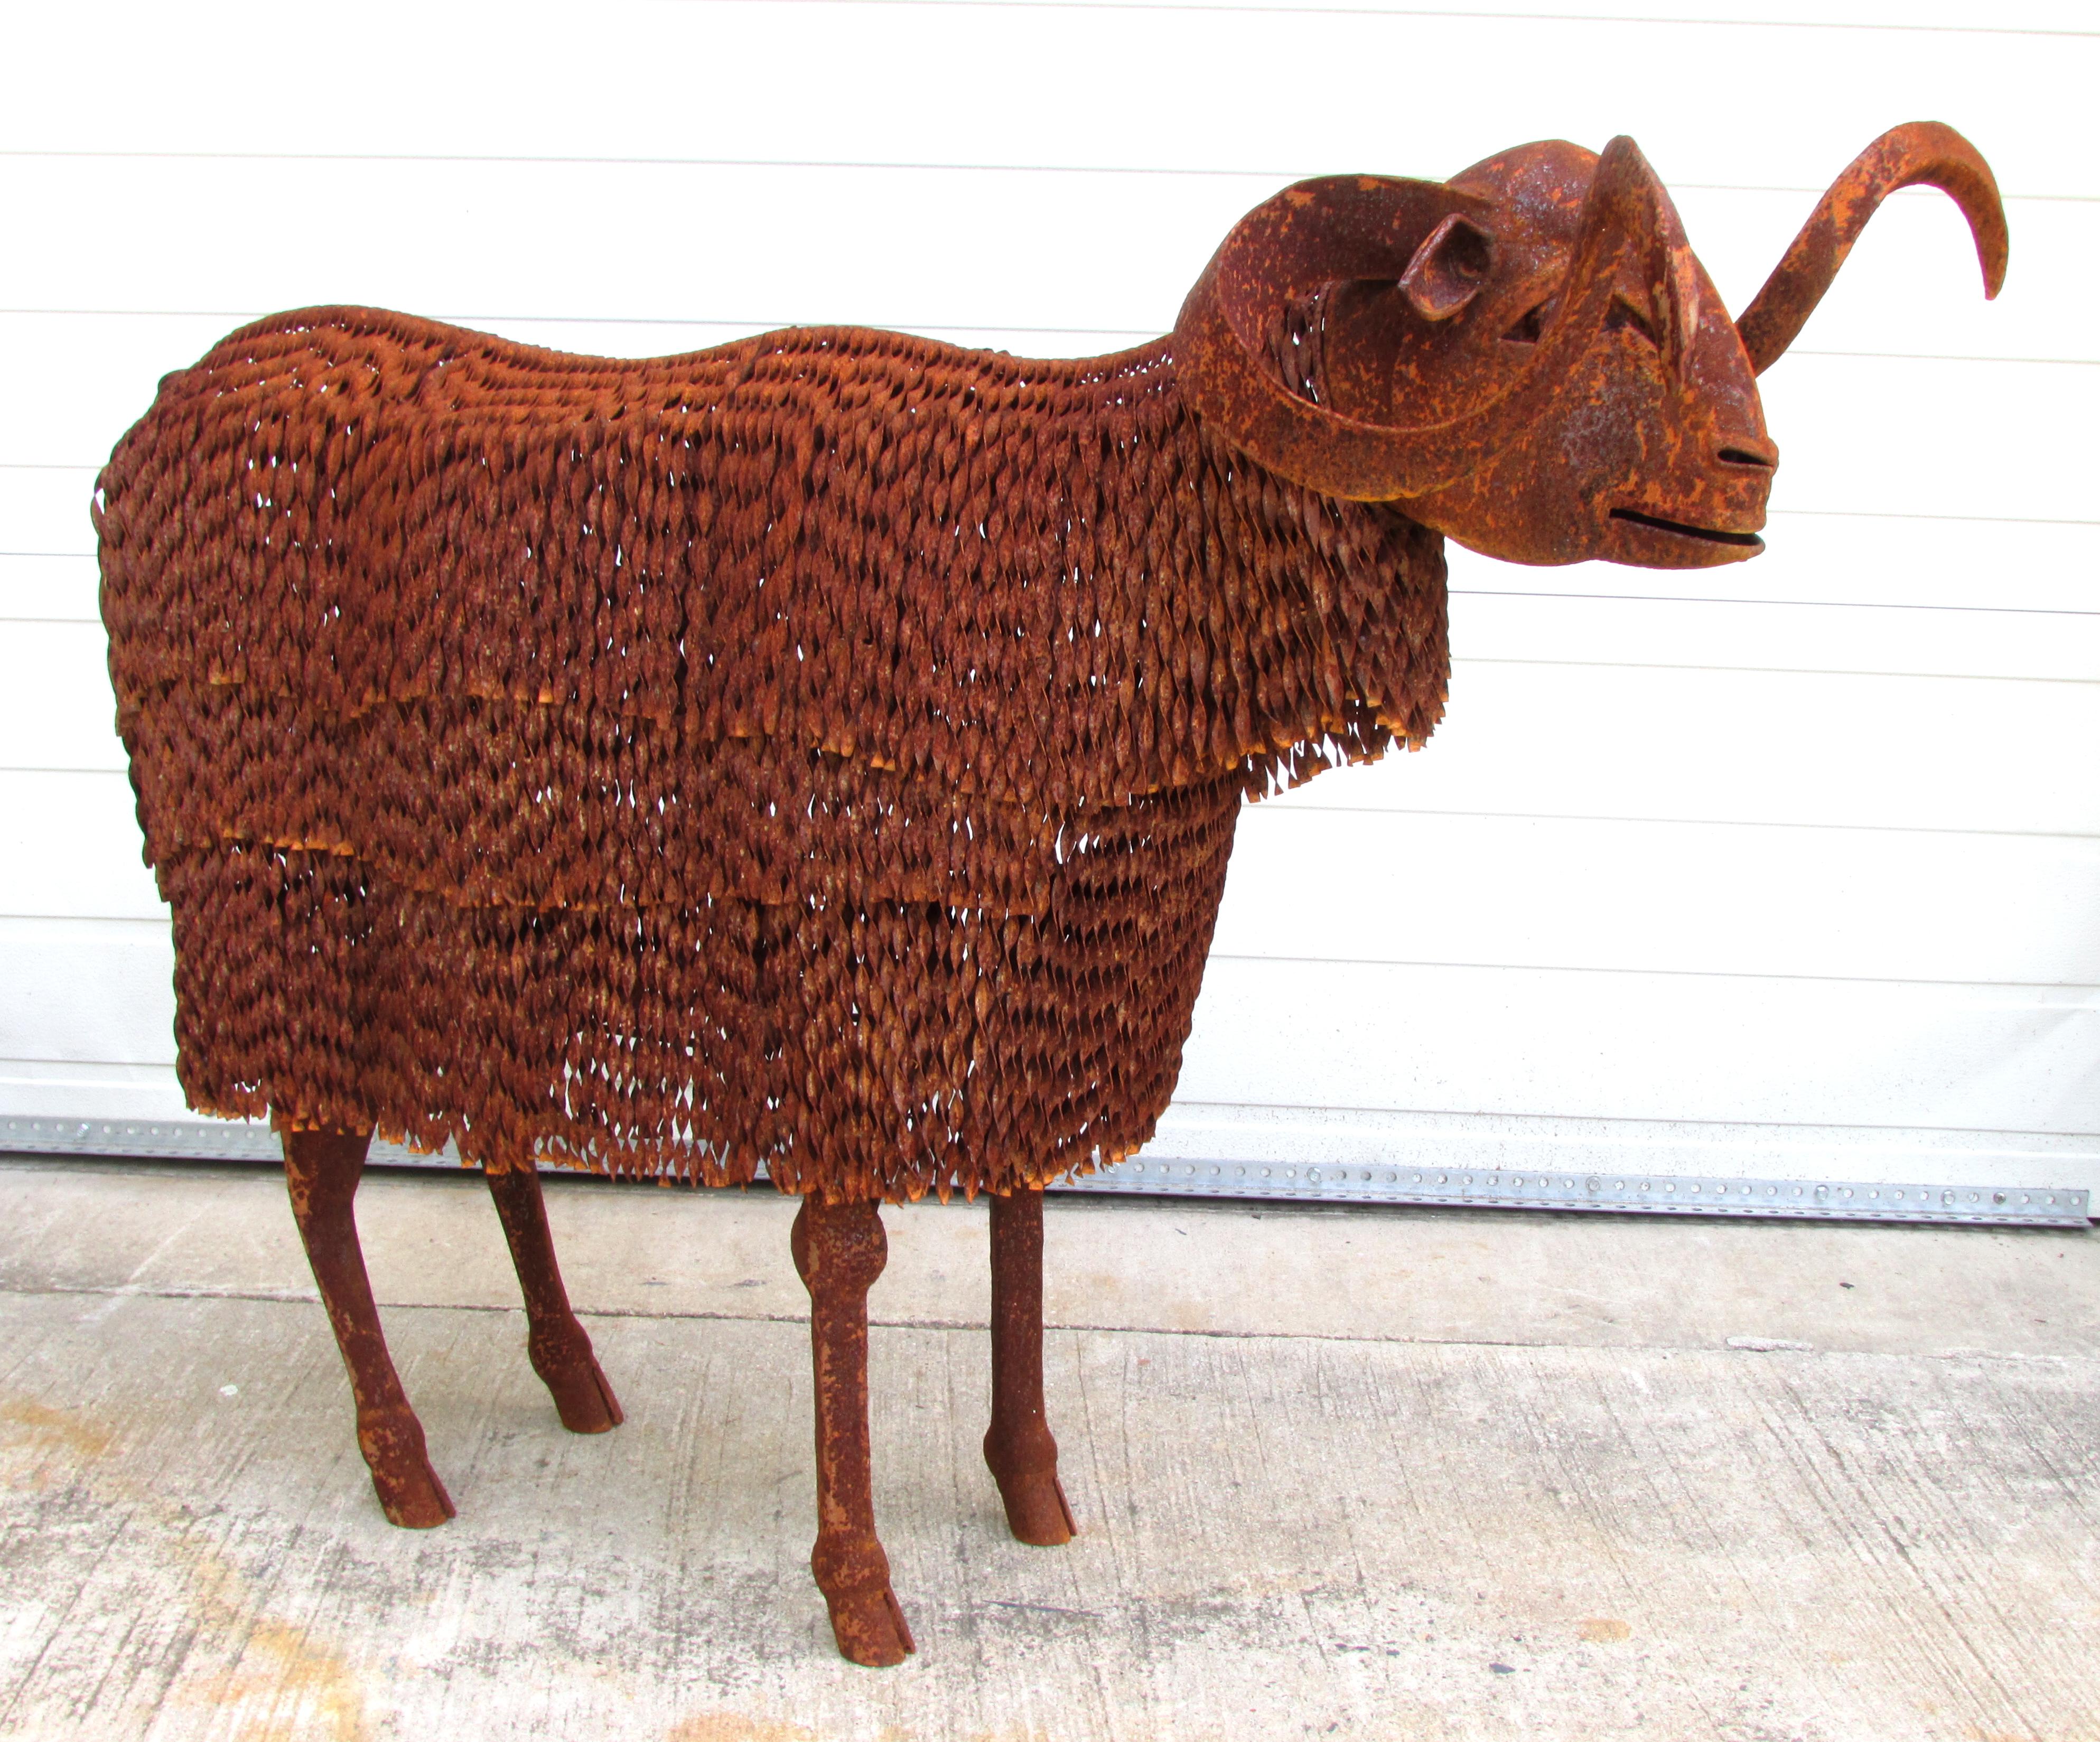 Lifesize shaggy sheep artist made from rusty metal.